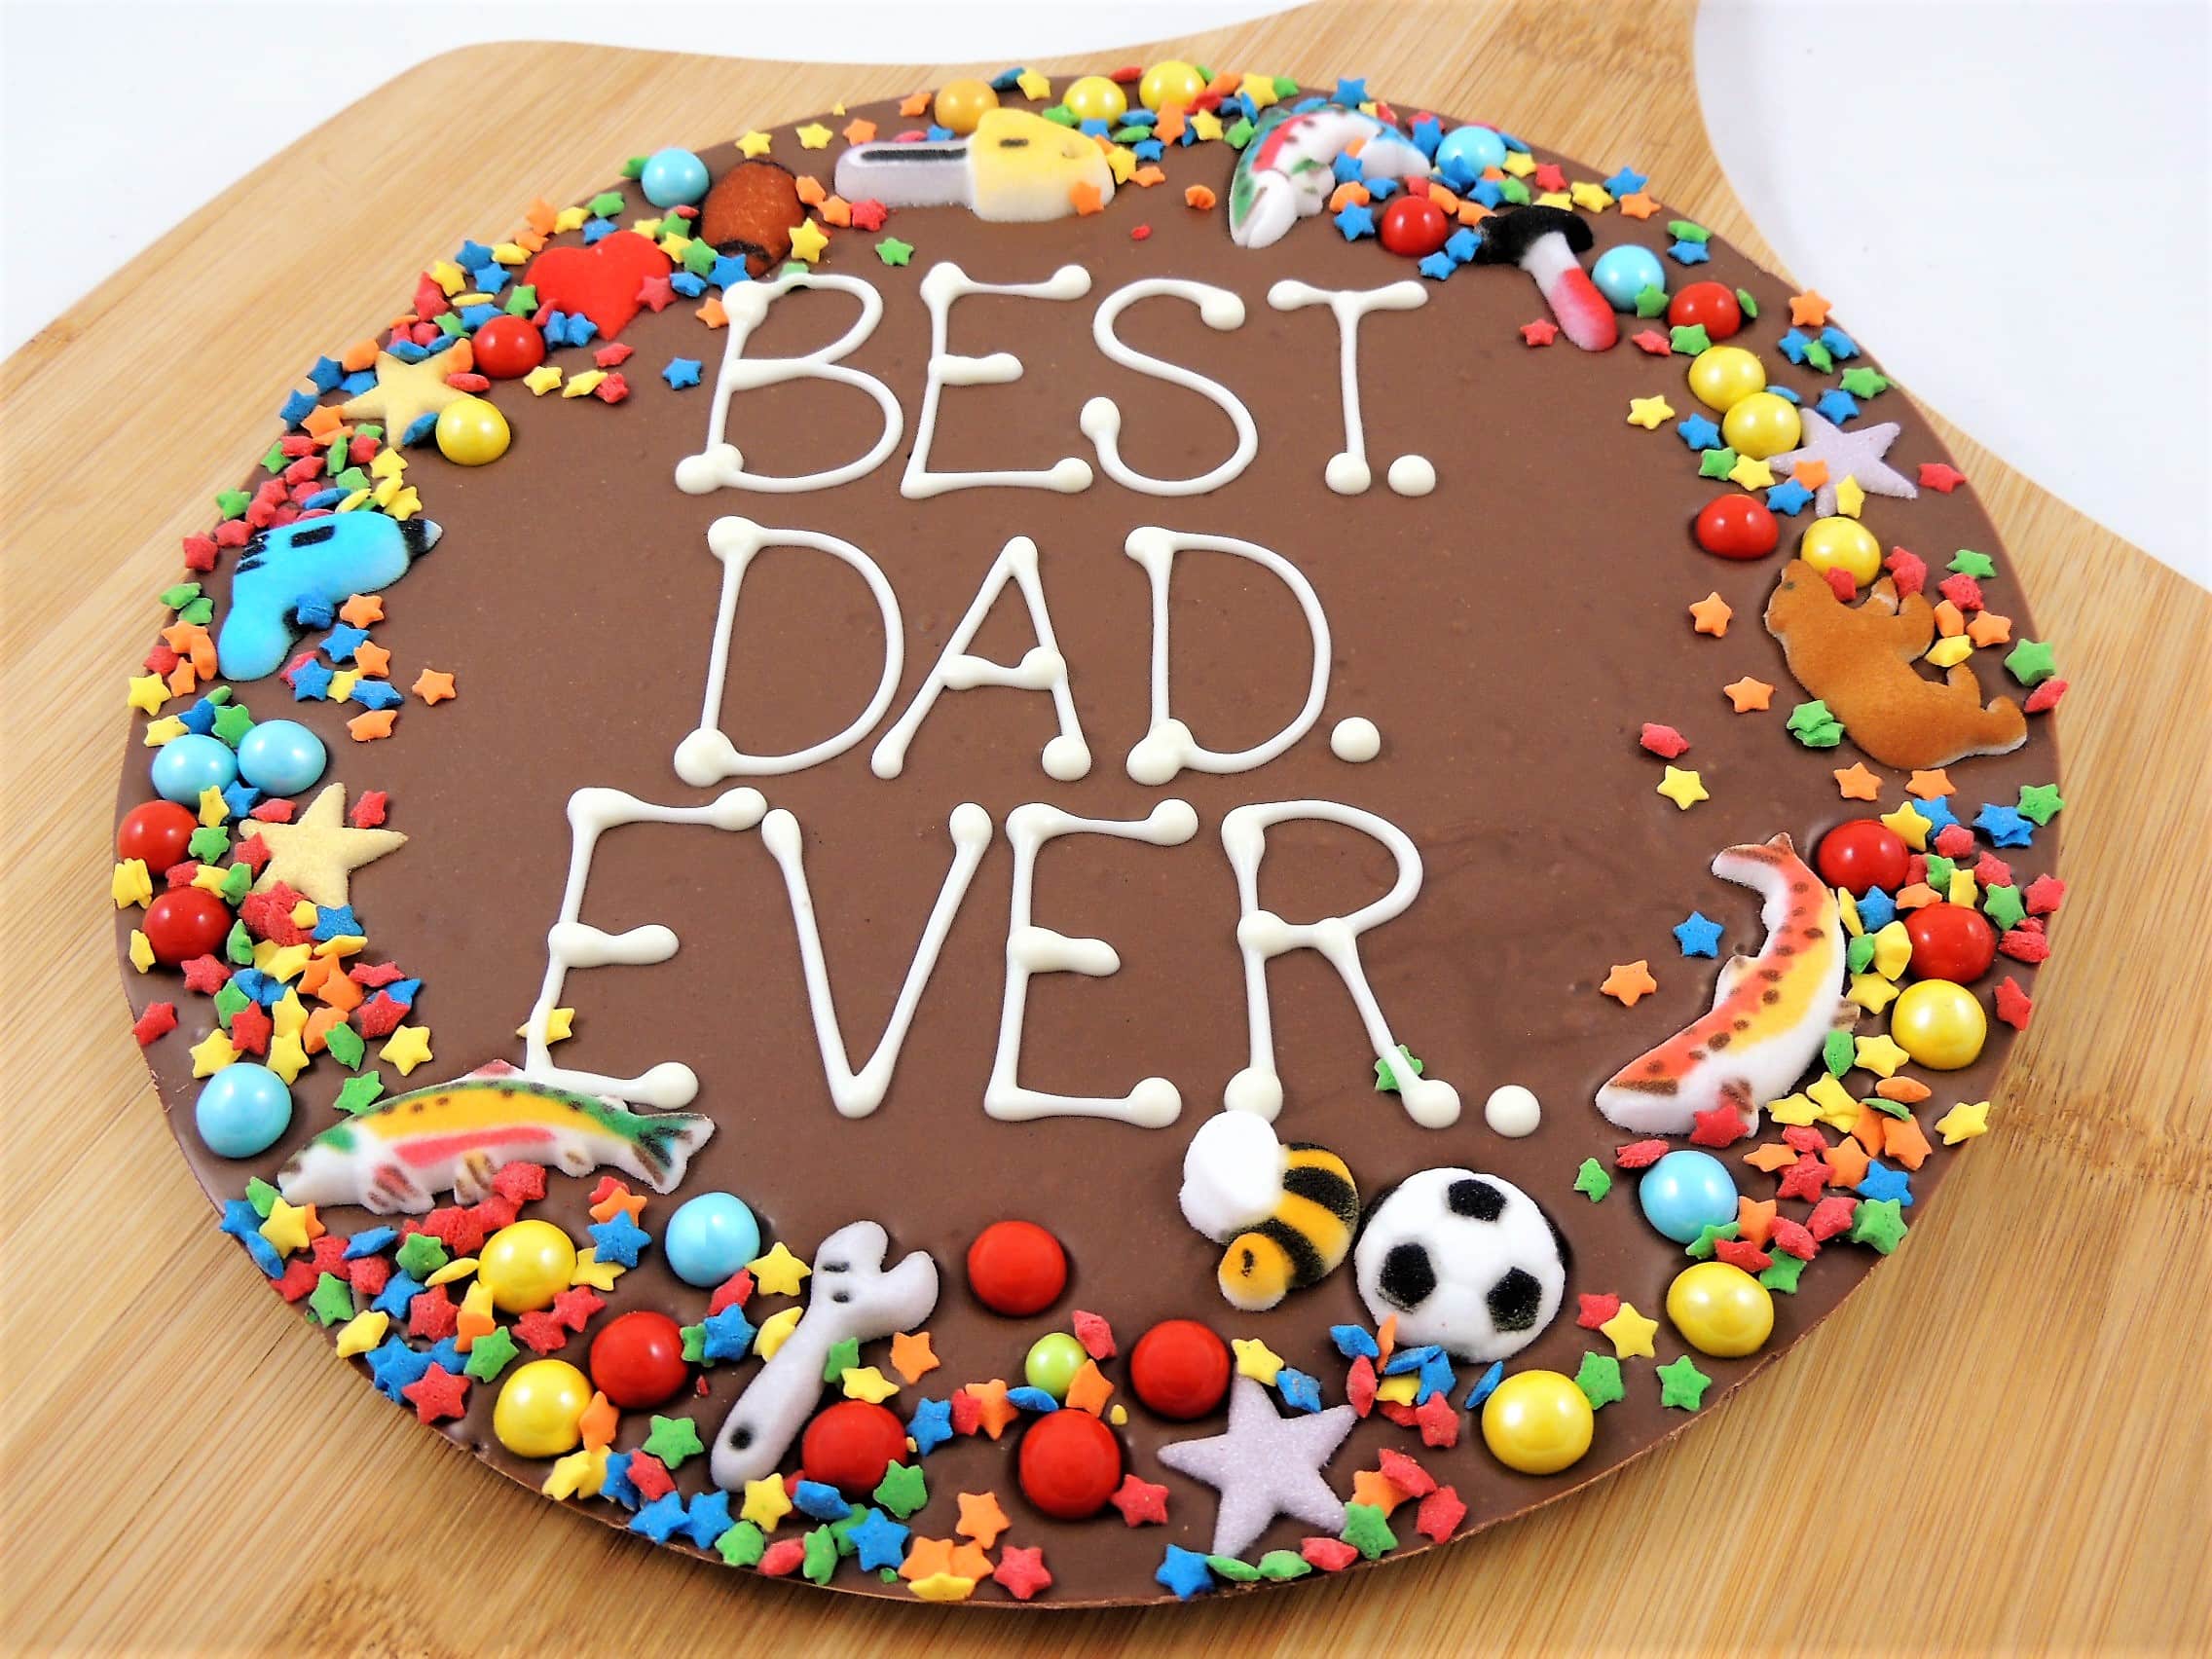 Gifts for Dad | Best Dad Ever Chocolate Pizza with colorful candies